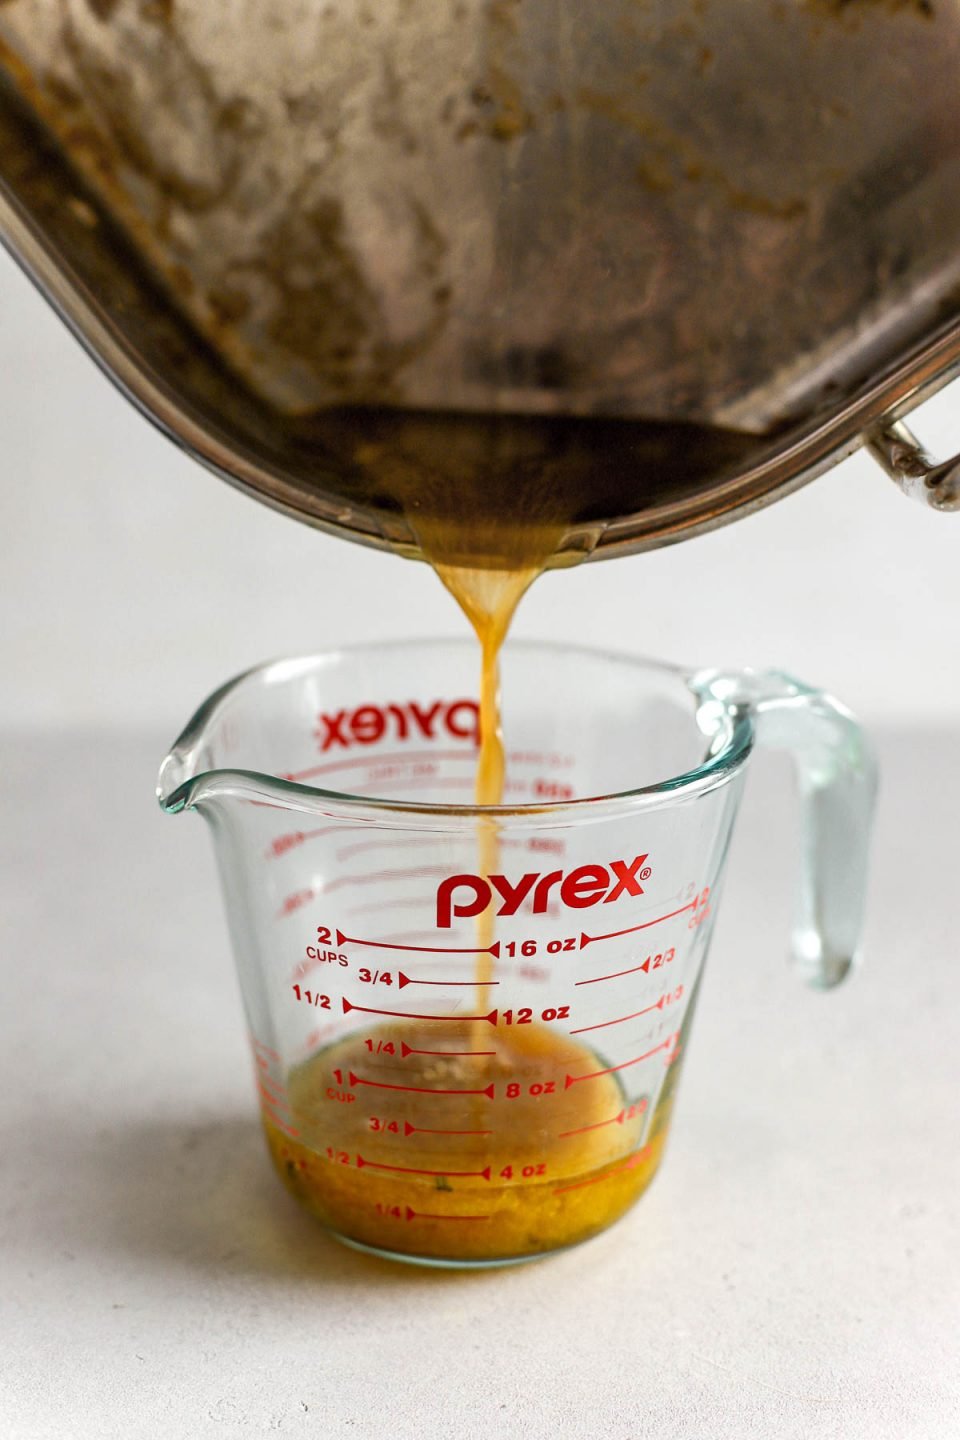 Roasted turkey pan drippings are being carefully poured into a liquid measuring cup from a roasting pan. The measuring cup sits atop a light colored textured surface.